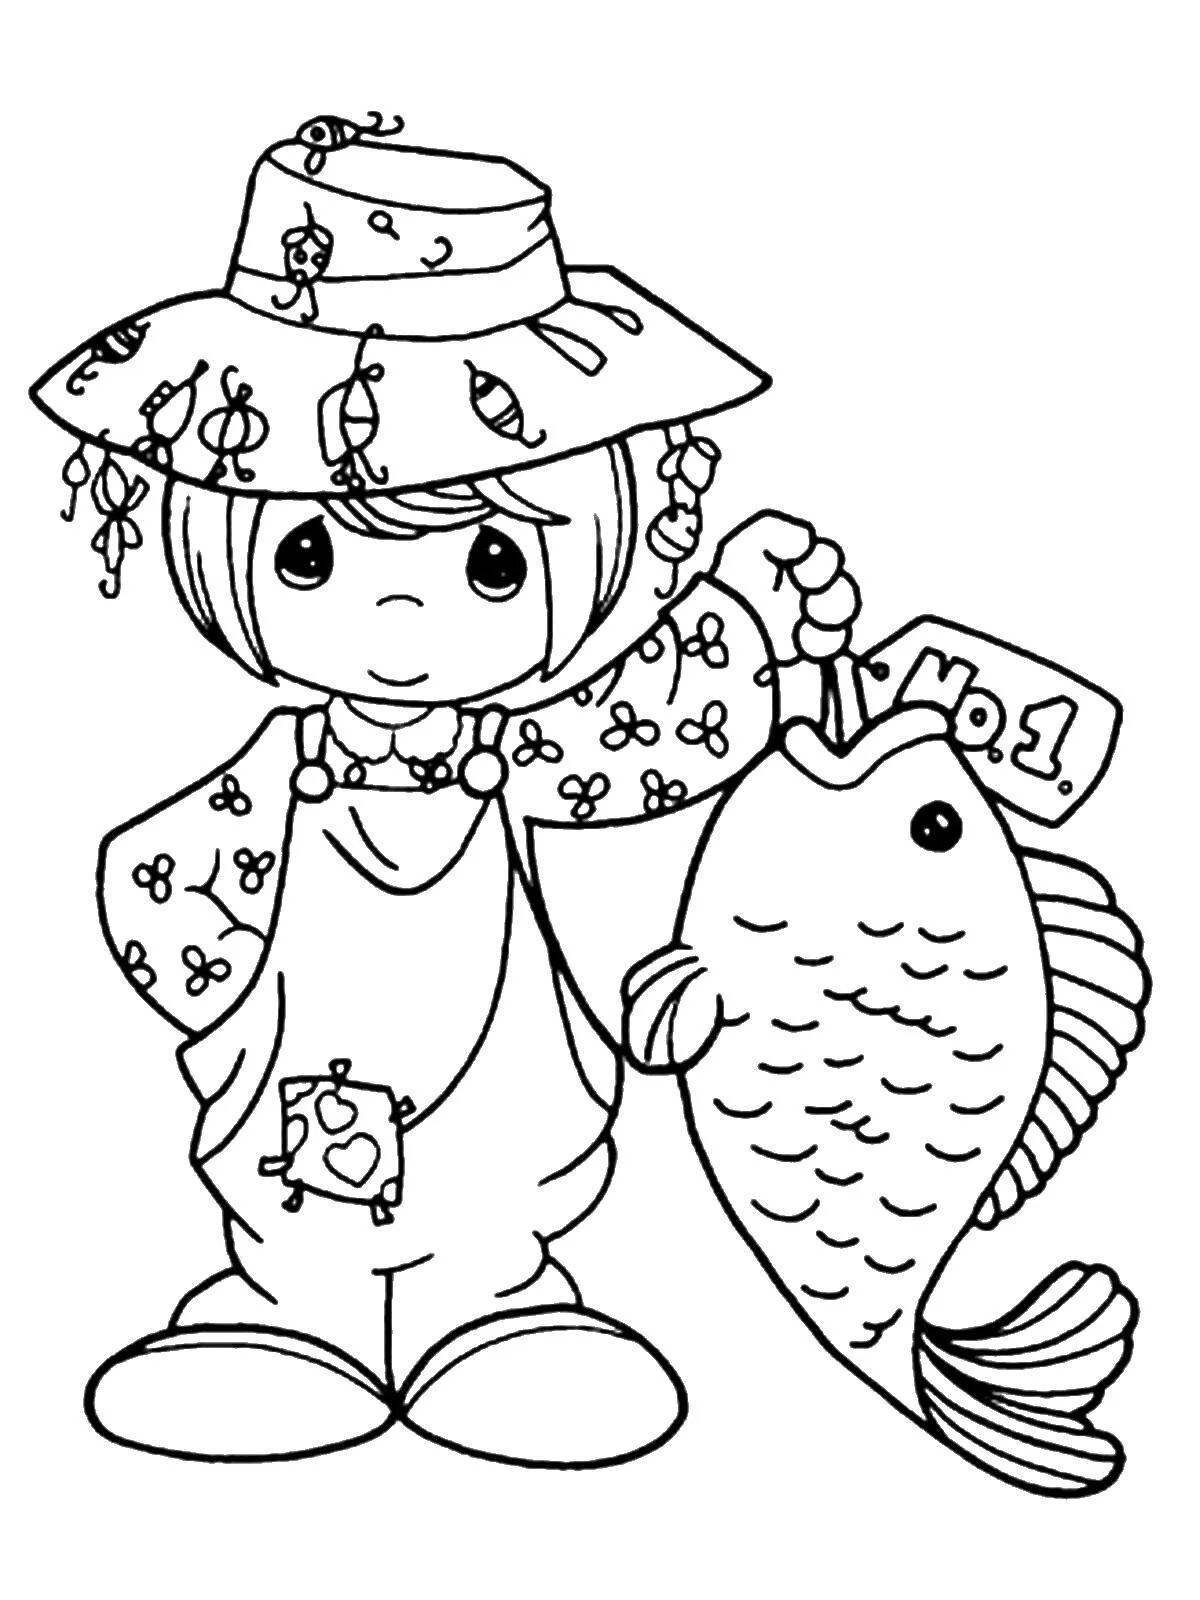 Fabulous fisherman coloring pages for kids